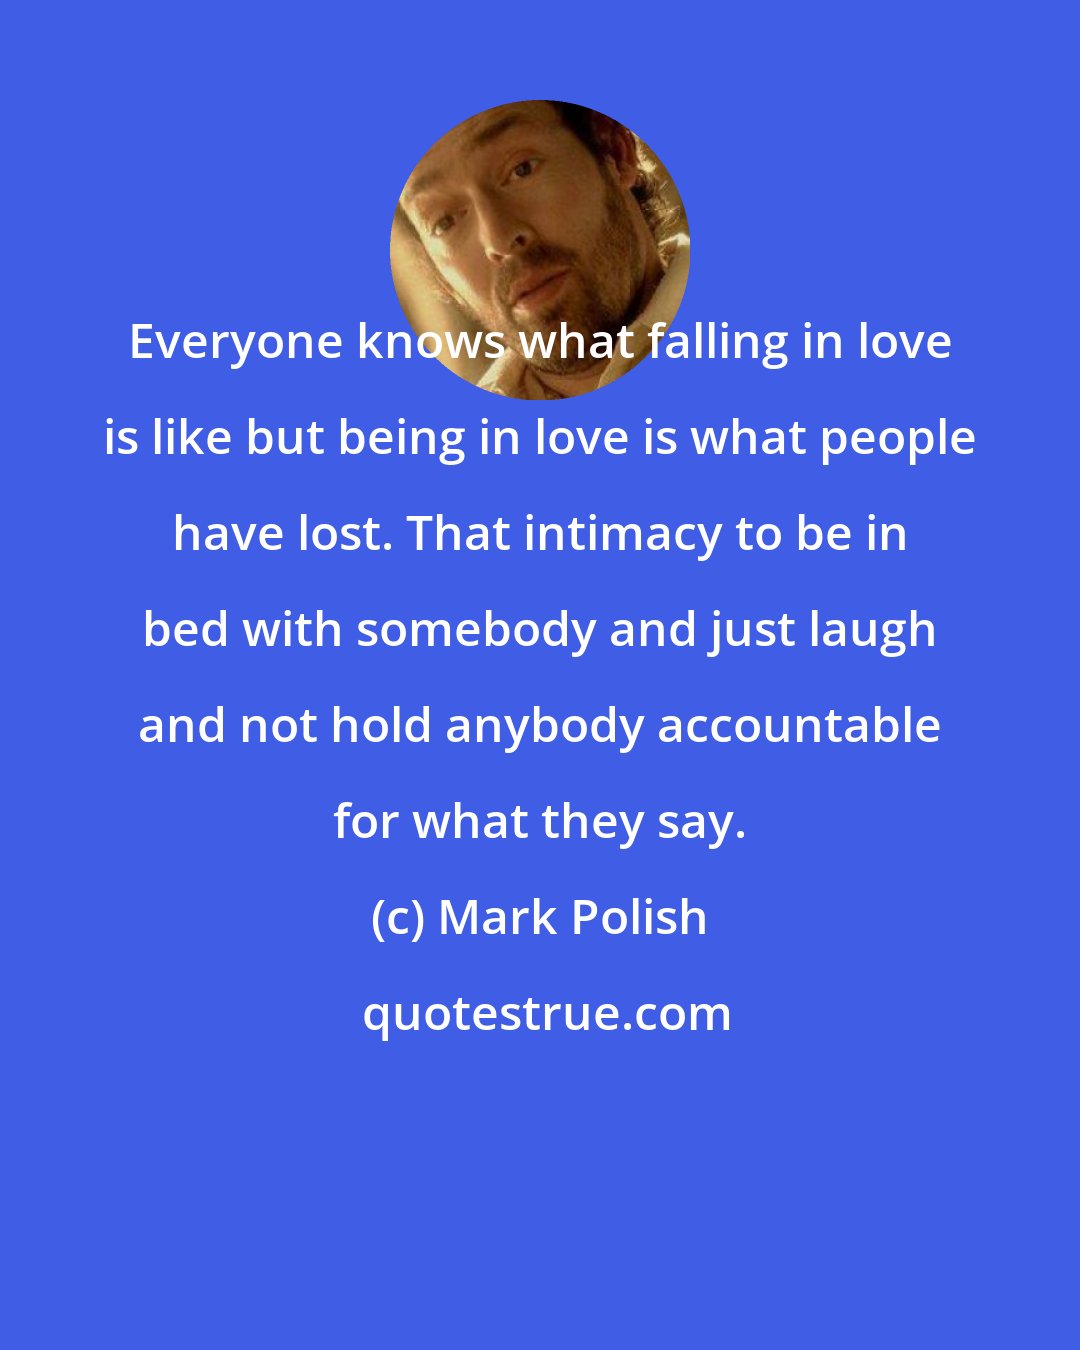 Mark Polish: Everyone knows what falling in love is like but being in love is what people have lost. That intimacy to be in bed with somebody and just laugh and not hold anybody accountable for what they say.